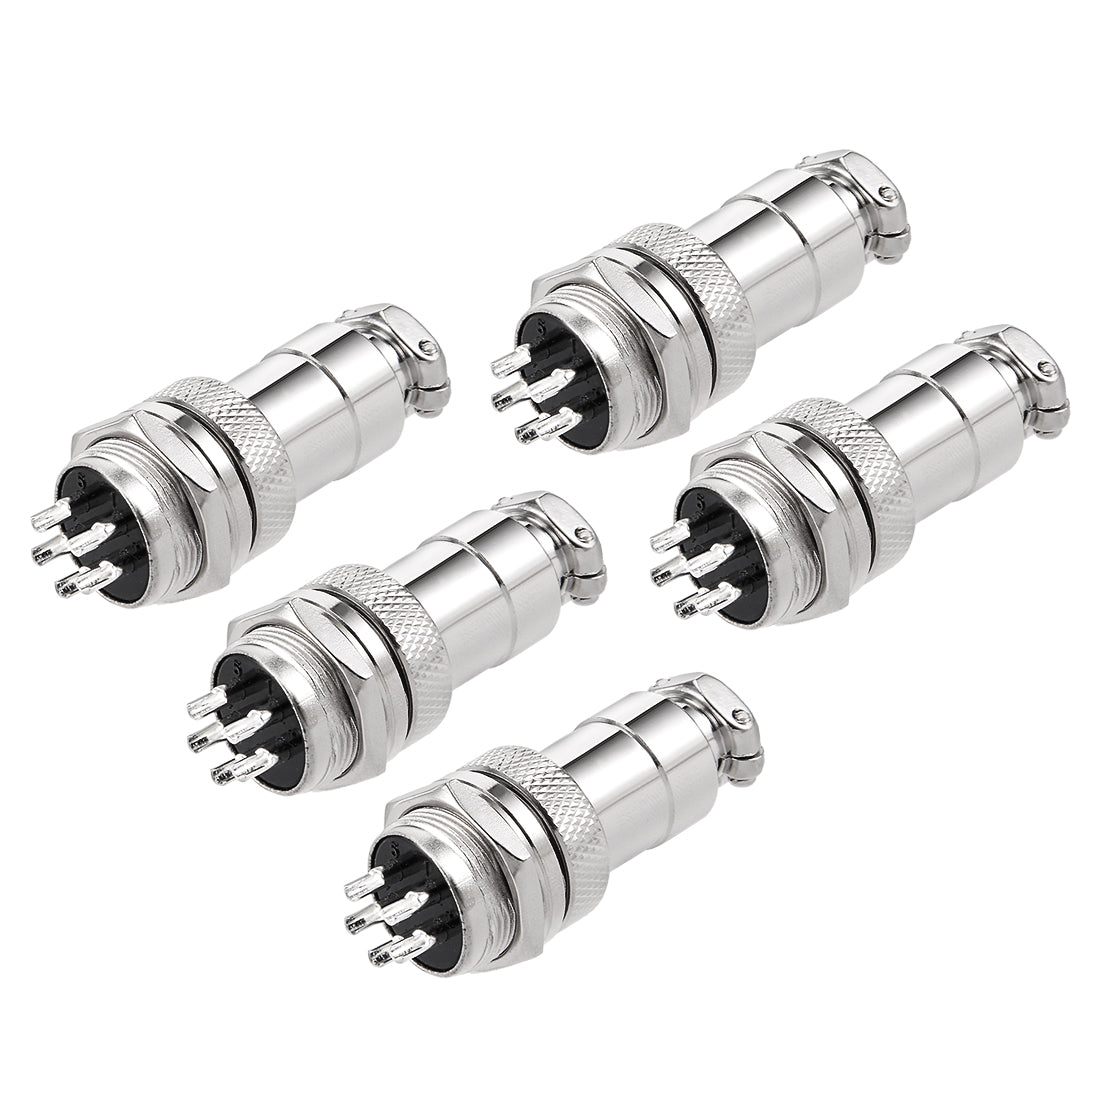 uxcell Uxcell 5pcs Aviation Connector 16mm 5P 5A 125V GX16-5 Waterproof Male Wire Panel Power Chassis Fittings Connector Aviation Silver Tone